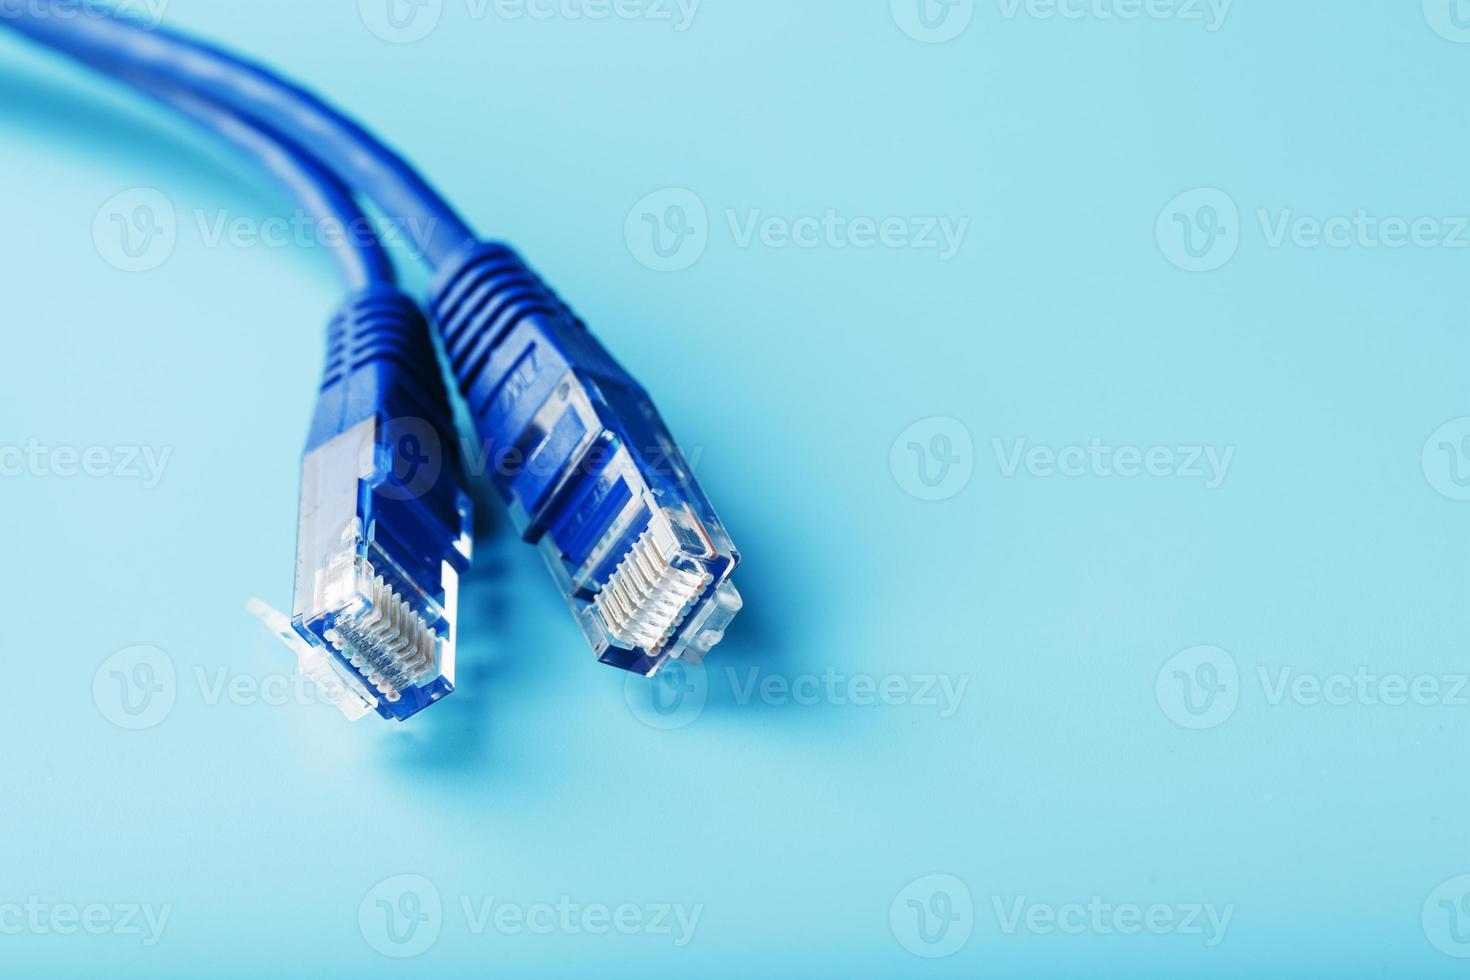 Ethernet Cable connector Patch cord cord close-up on a blue background with free space photo